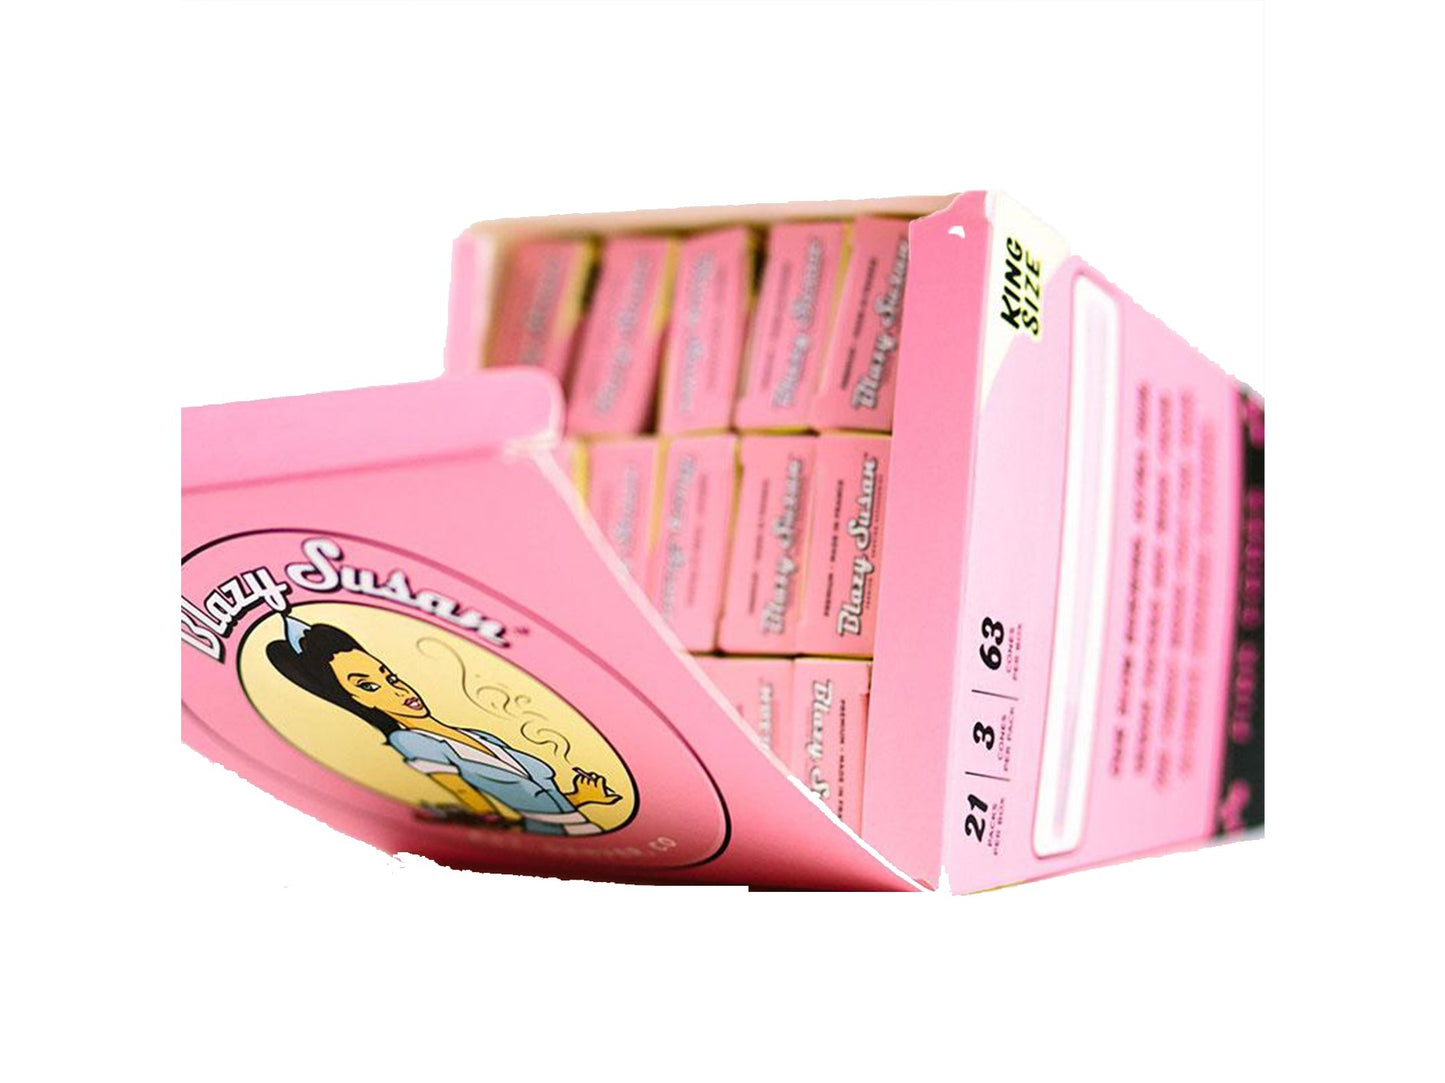 BLAZY SUSAN King Size Pink Pre-Rolled Cones – Full Box - VIR Wholesale